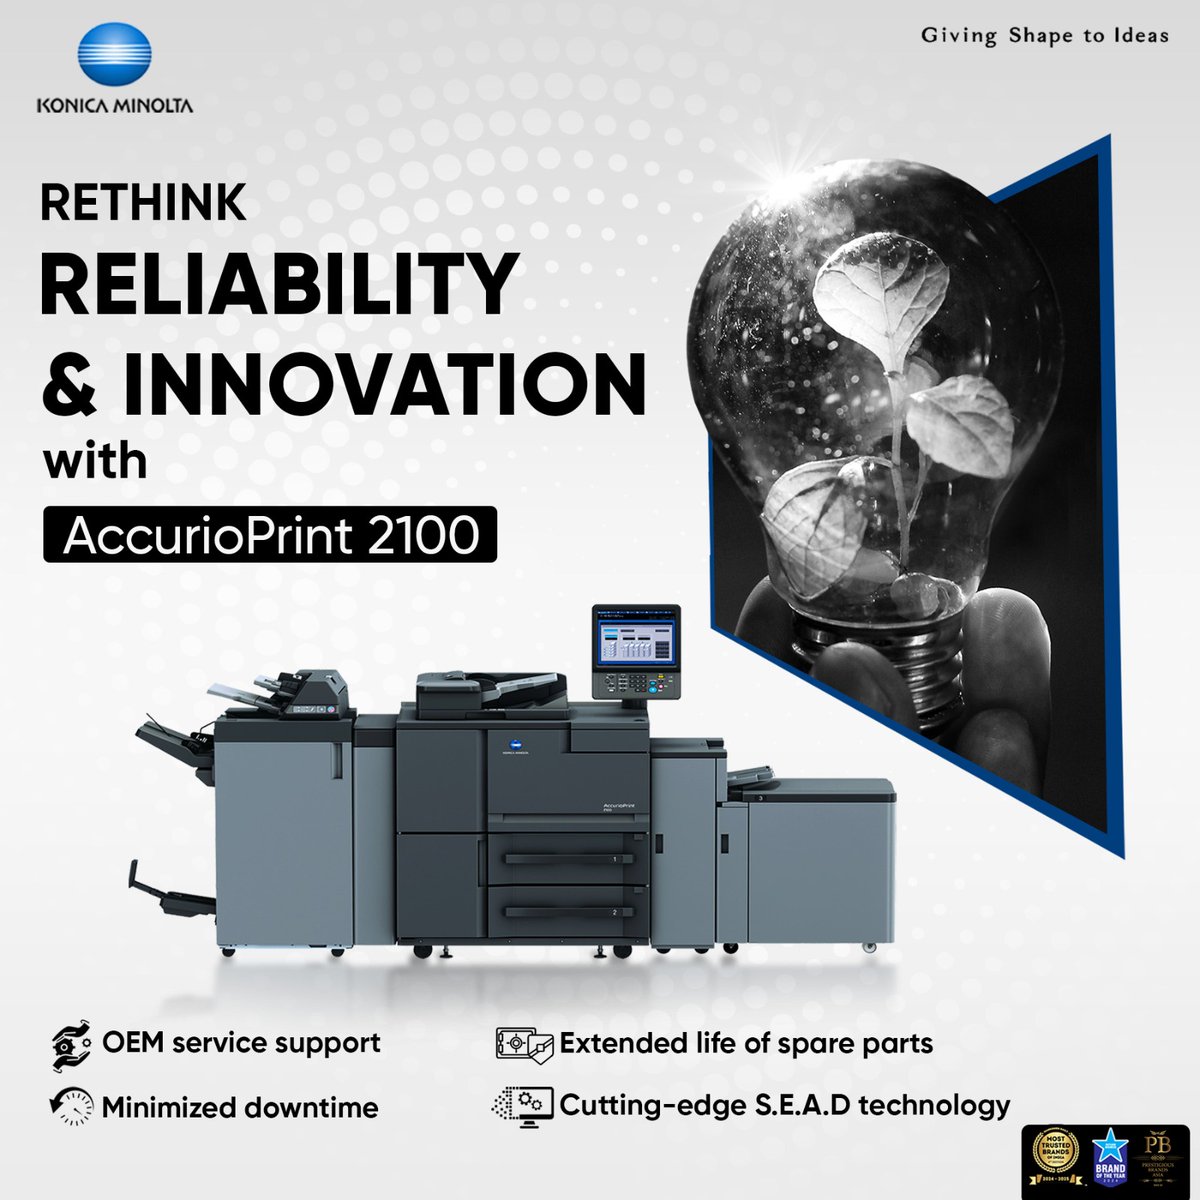 AccurioPrint 2100 defines reliability and innovation in the PFP market. With OEM service support, extended life for spare parts, minimised downtime, and S.E.A.D technology, it delivers unparalleled service & quality.

#Innovation #BlacknWhite #MonochromePrinters #PrintSolutions